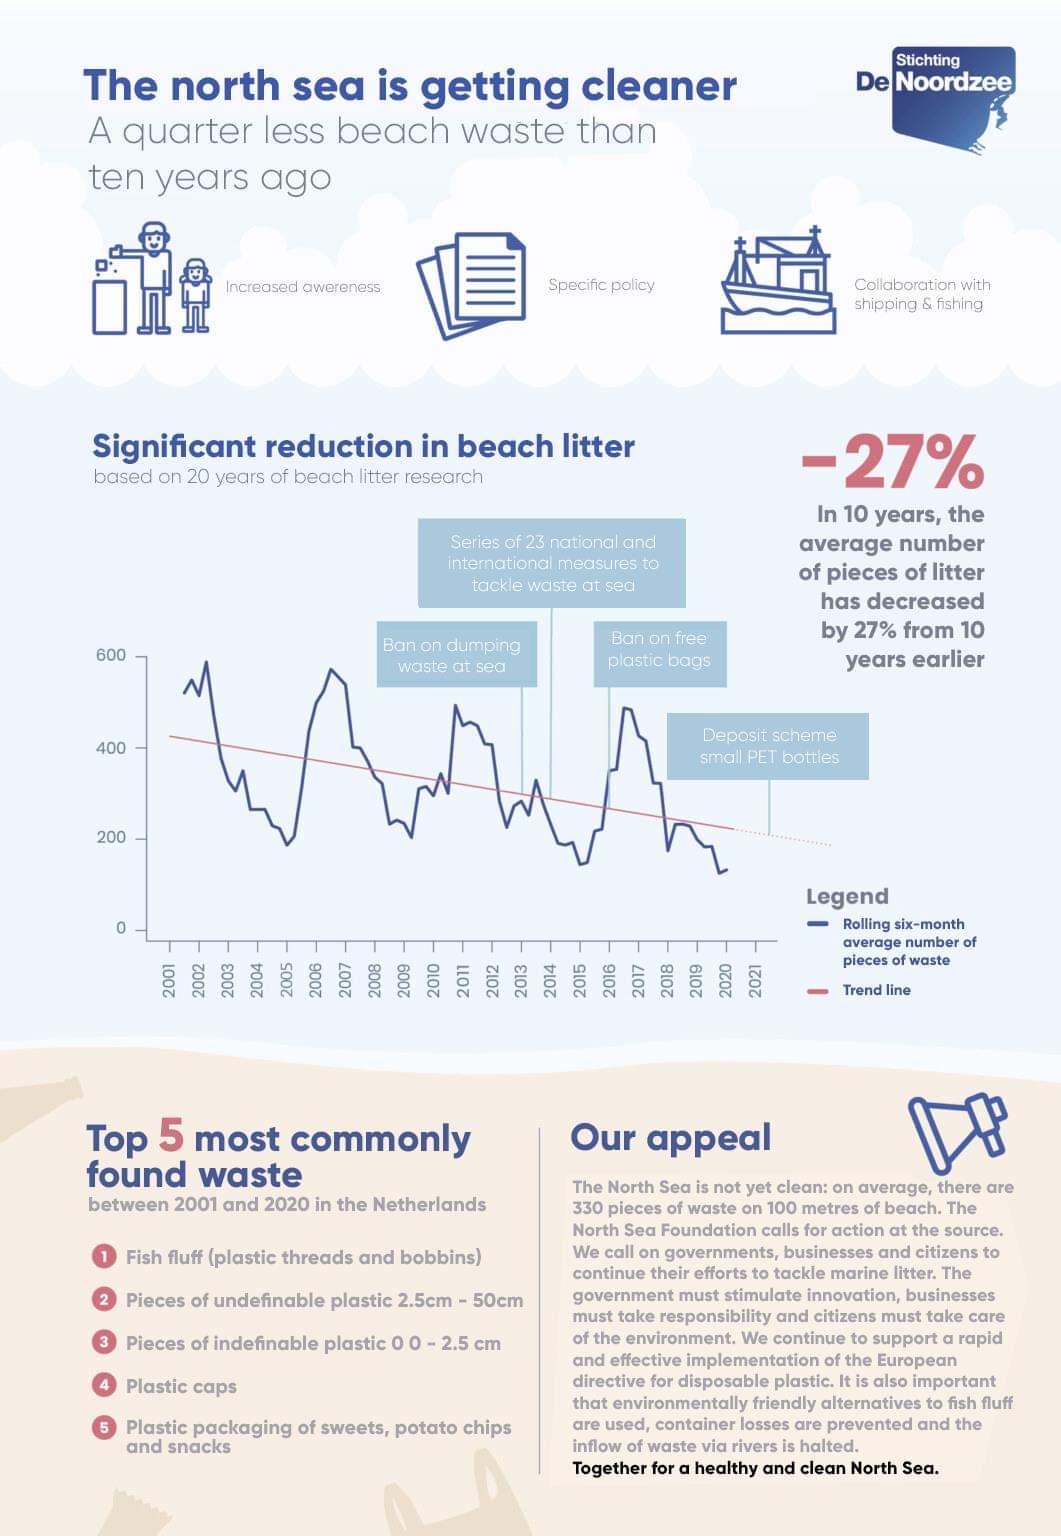 Based on 20 years of beach litter research.